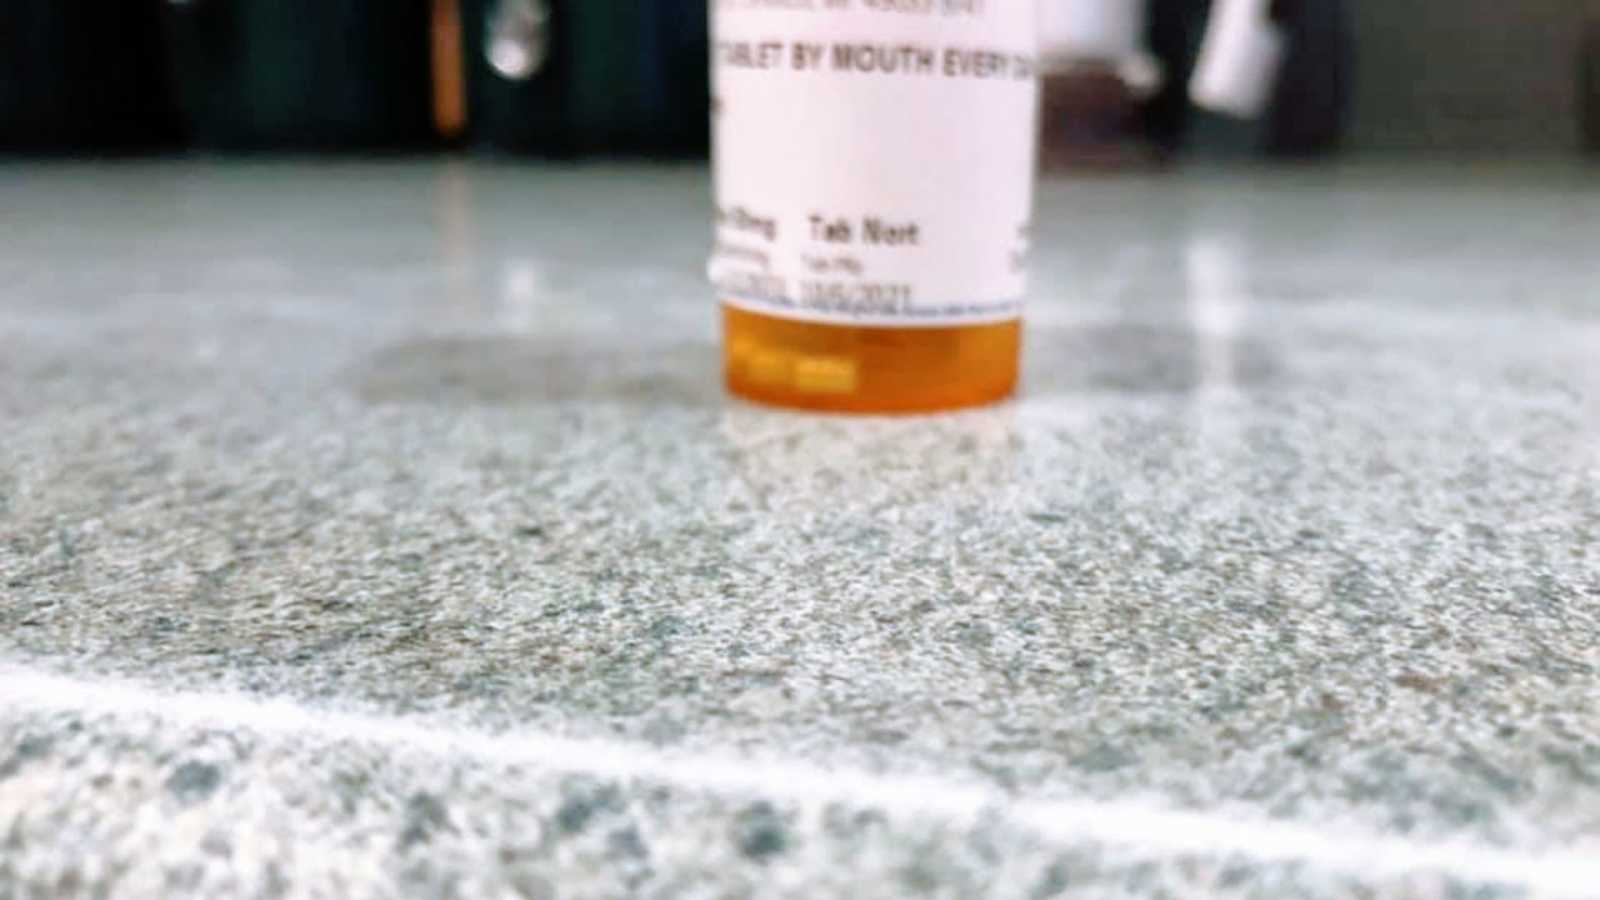 A bottle of anxiety medication sat on top of a granite countertop